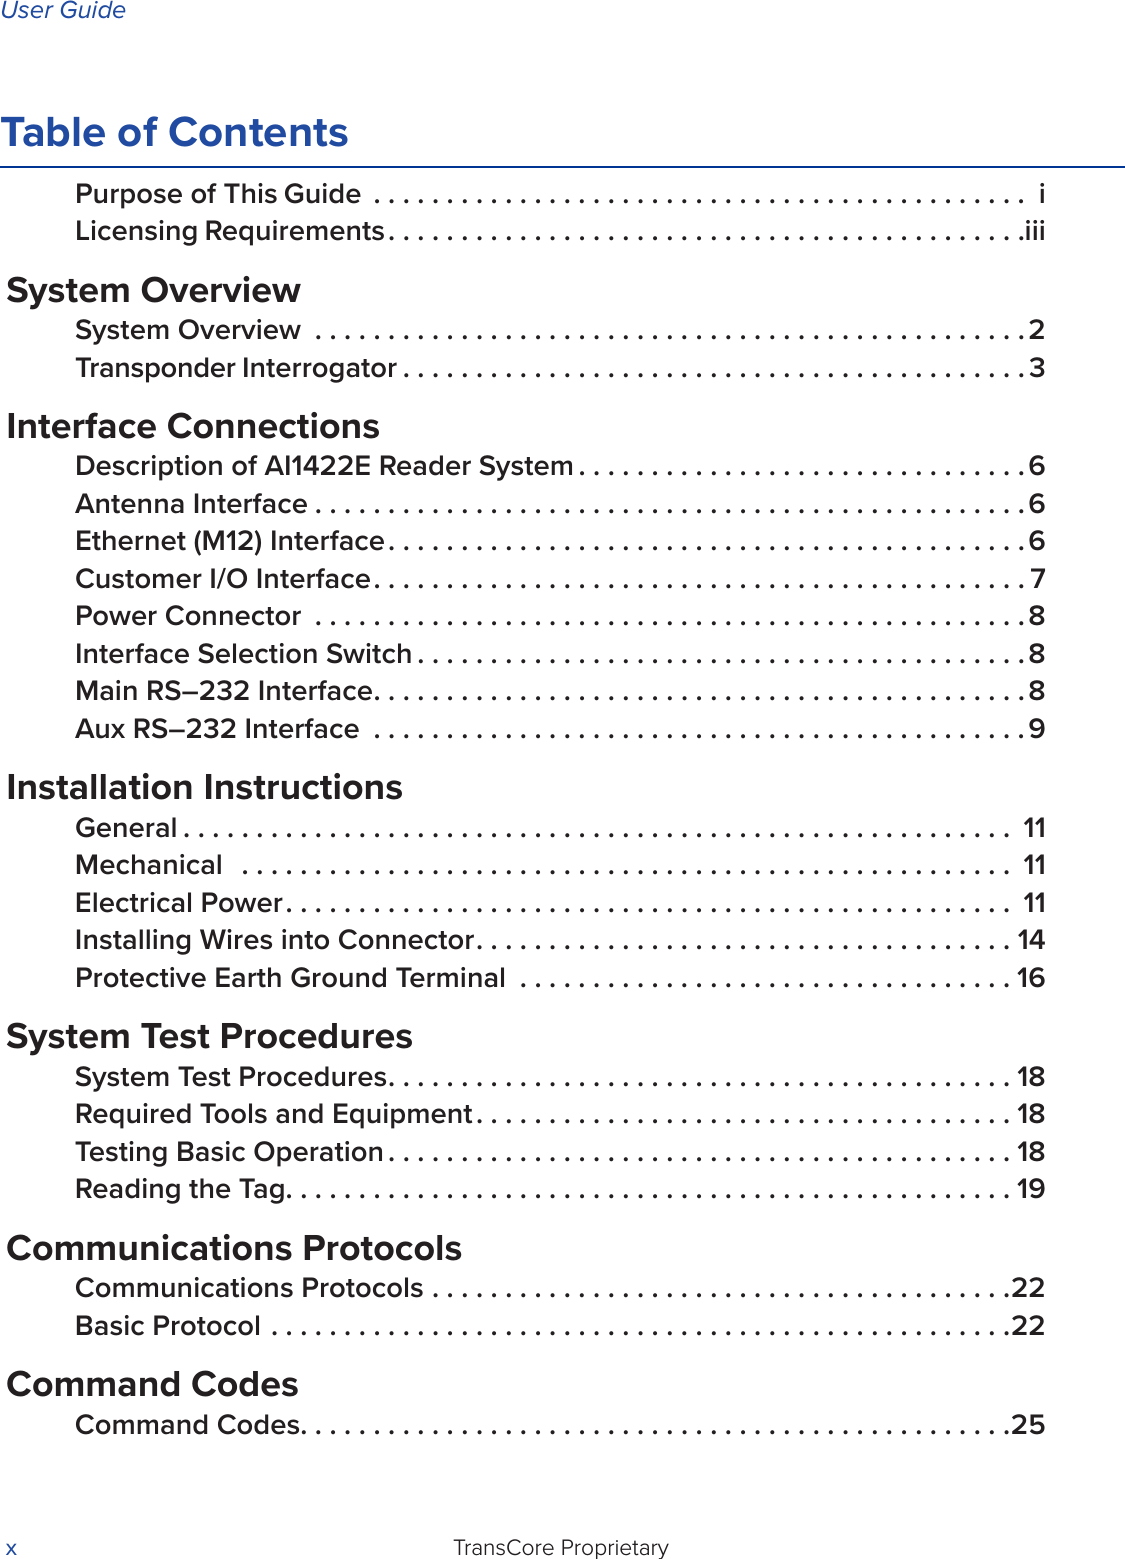 User GuideTransCore Proprietary xTable of ContentsPurpose of This Guide ............................................. iLicensing Requirements............................................iiiSystem OverviewSystem Overview .................................................2Transponder Interrogator ...........................................3Interface ConnectionsDescription of AI1422E Reader System ...............................6Antenna Interface .................................................6Ethernet (M12) Interface............................................6Customer I/O Interface.............................................7Power Connector .................................................8Interface Selection Switch ..........................................8Main RS–232 Interface.............................................8Aux RS–232 Interface .............................................9Installation InstructionsGeneral ......................................................... 11Mechanical  ..................................................... 11Electrical Power.................................................. 11Installing Wires into Connector.....................................14Protective Earth Ground Terminal ..................................16System Test ProceduresSystem Test Procedures...........................................18Required Tools and Equipment .....................................18Testing Basic Operation ...........................................18Reading the Tag..................................................19Communications ProtocolsCommunications Protocols ........................................22Basic Protocol ...................................................22Command CodesCommand Codes.................................................25